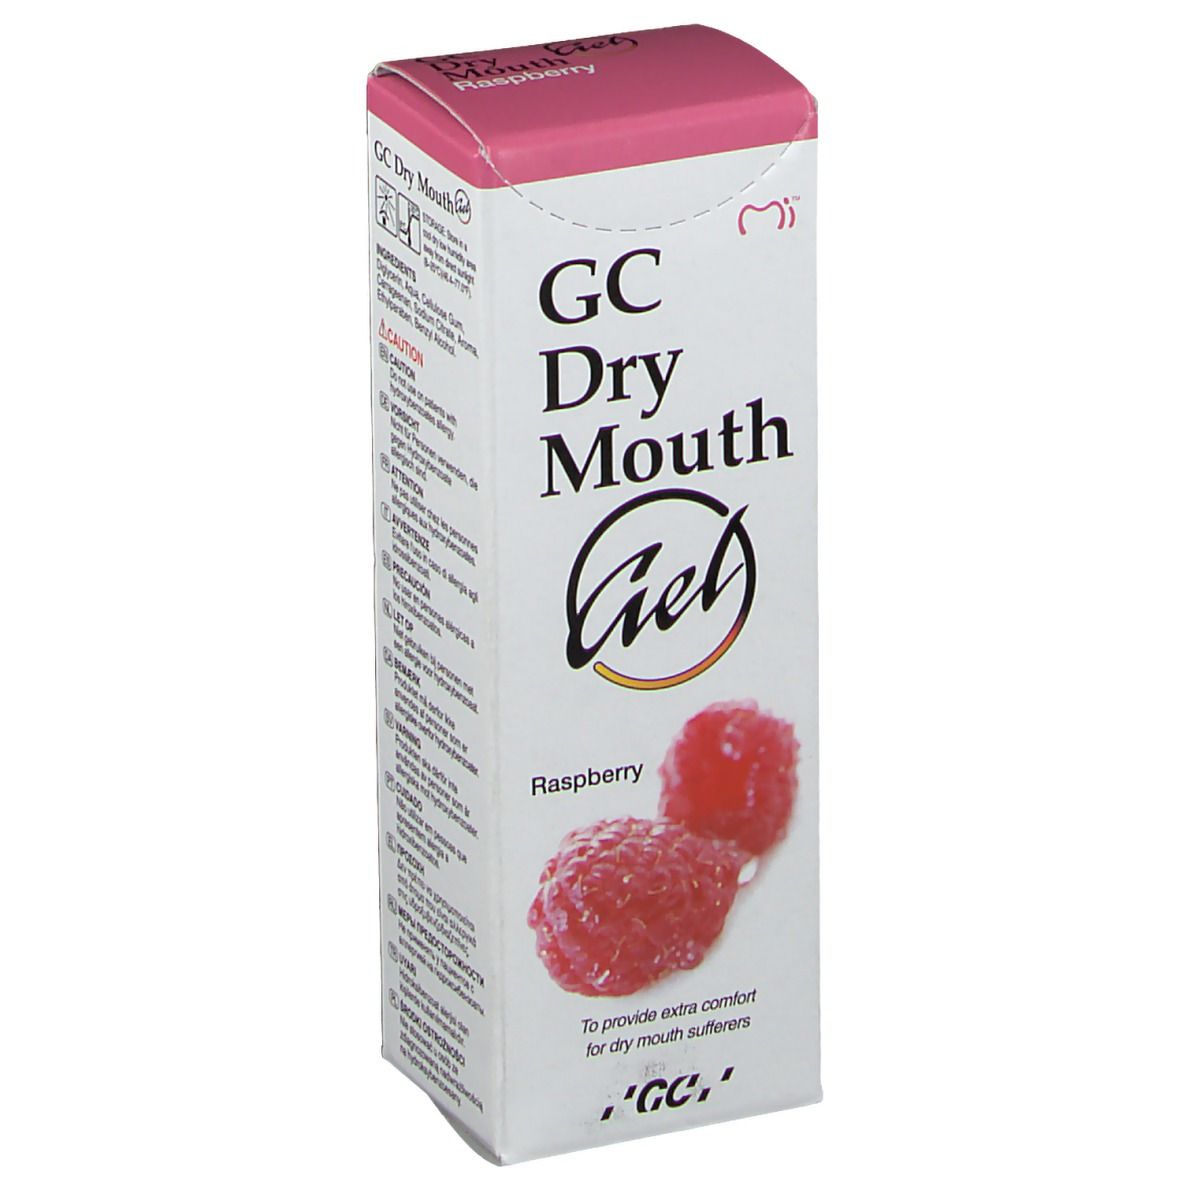 GC Dry Mouth Gel Himbeere